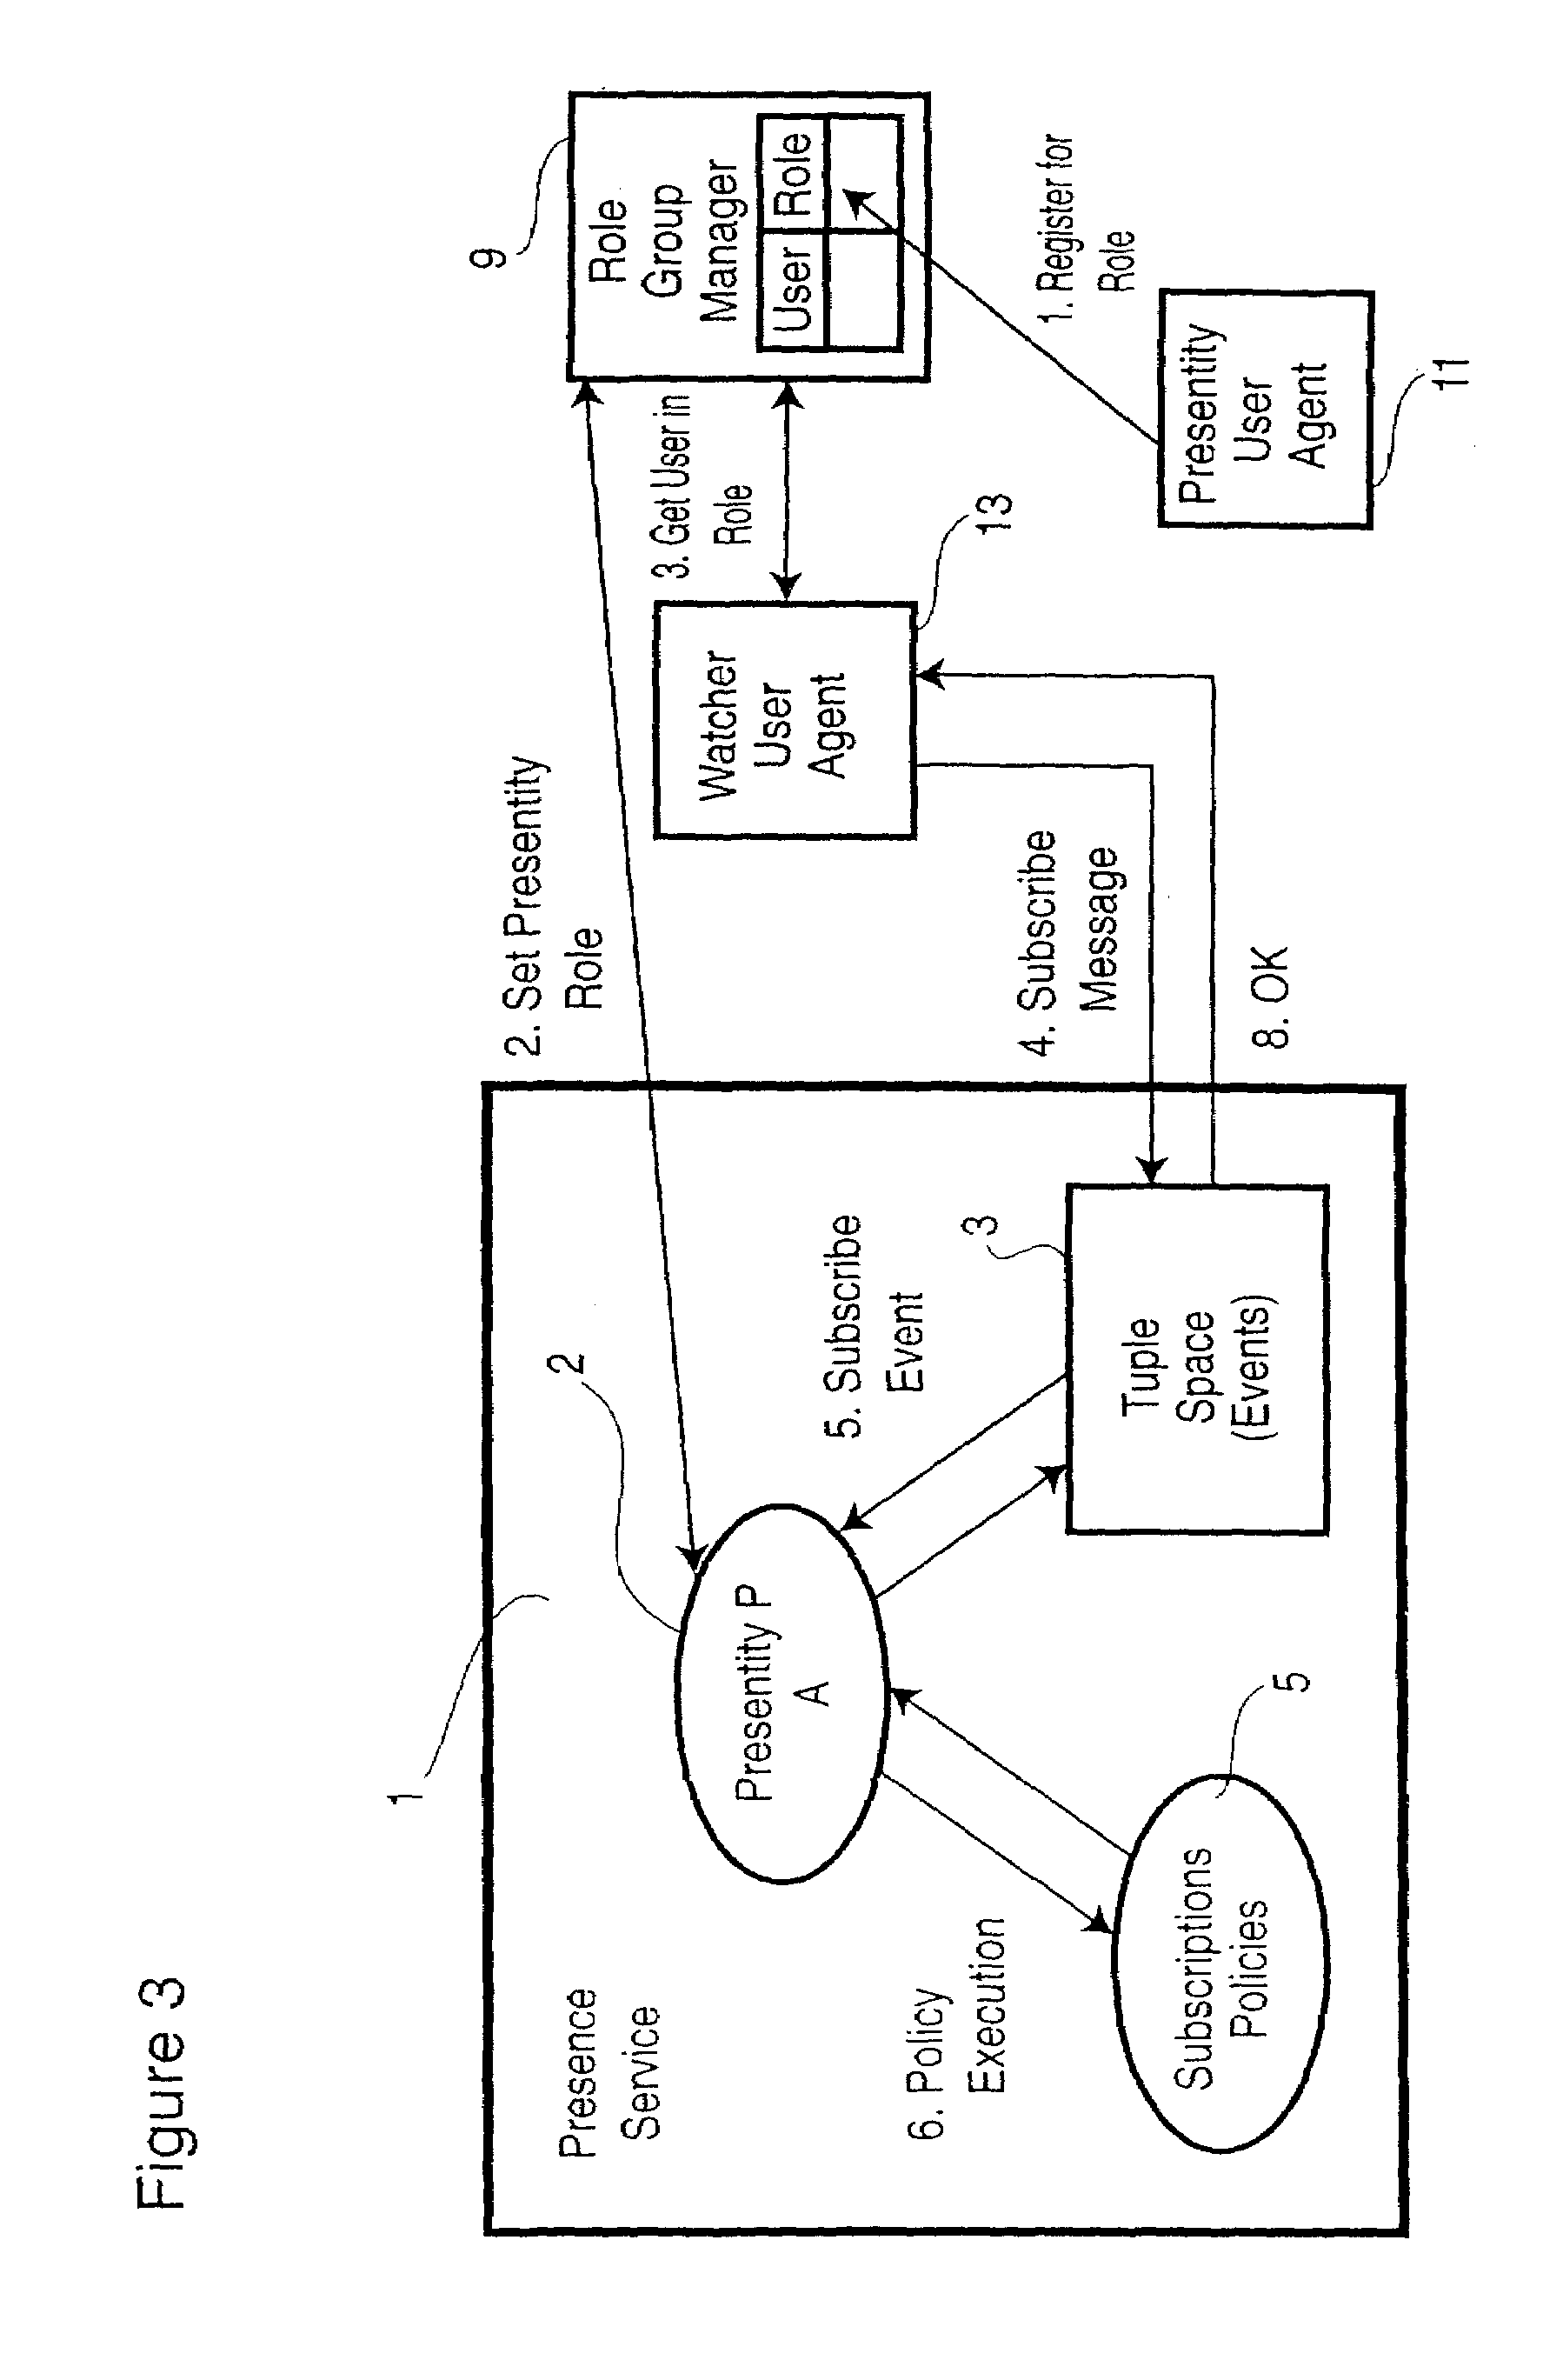 Role-based presence enabled service for communication system